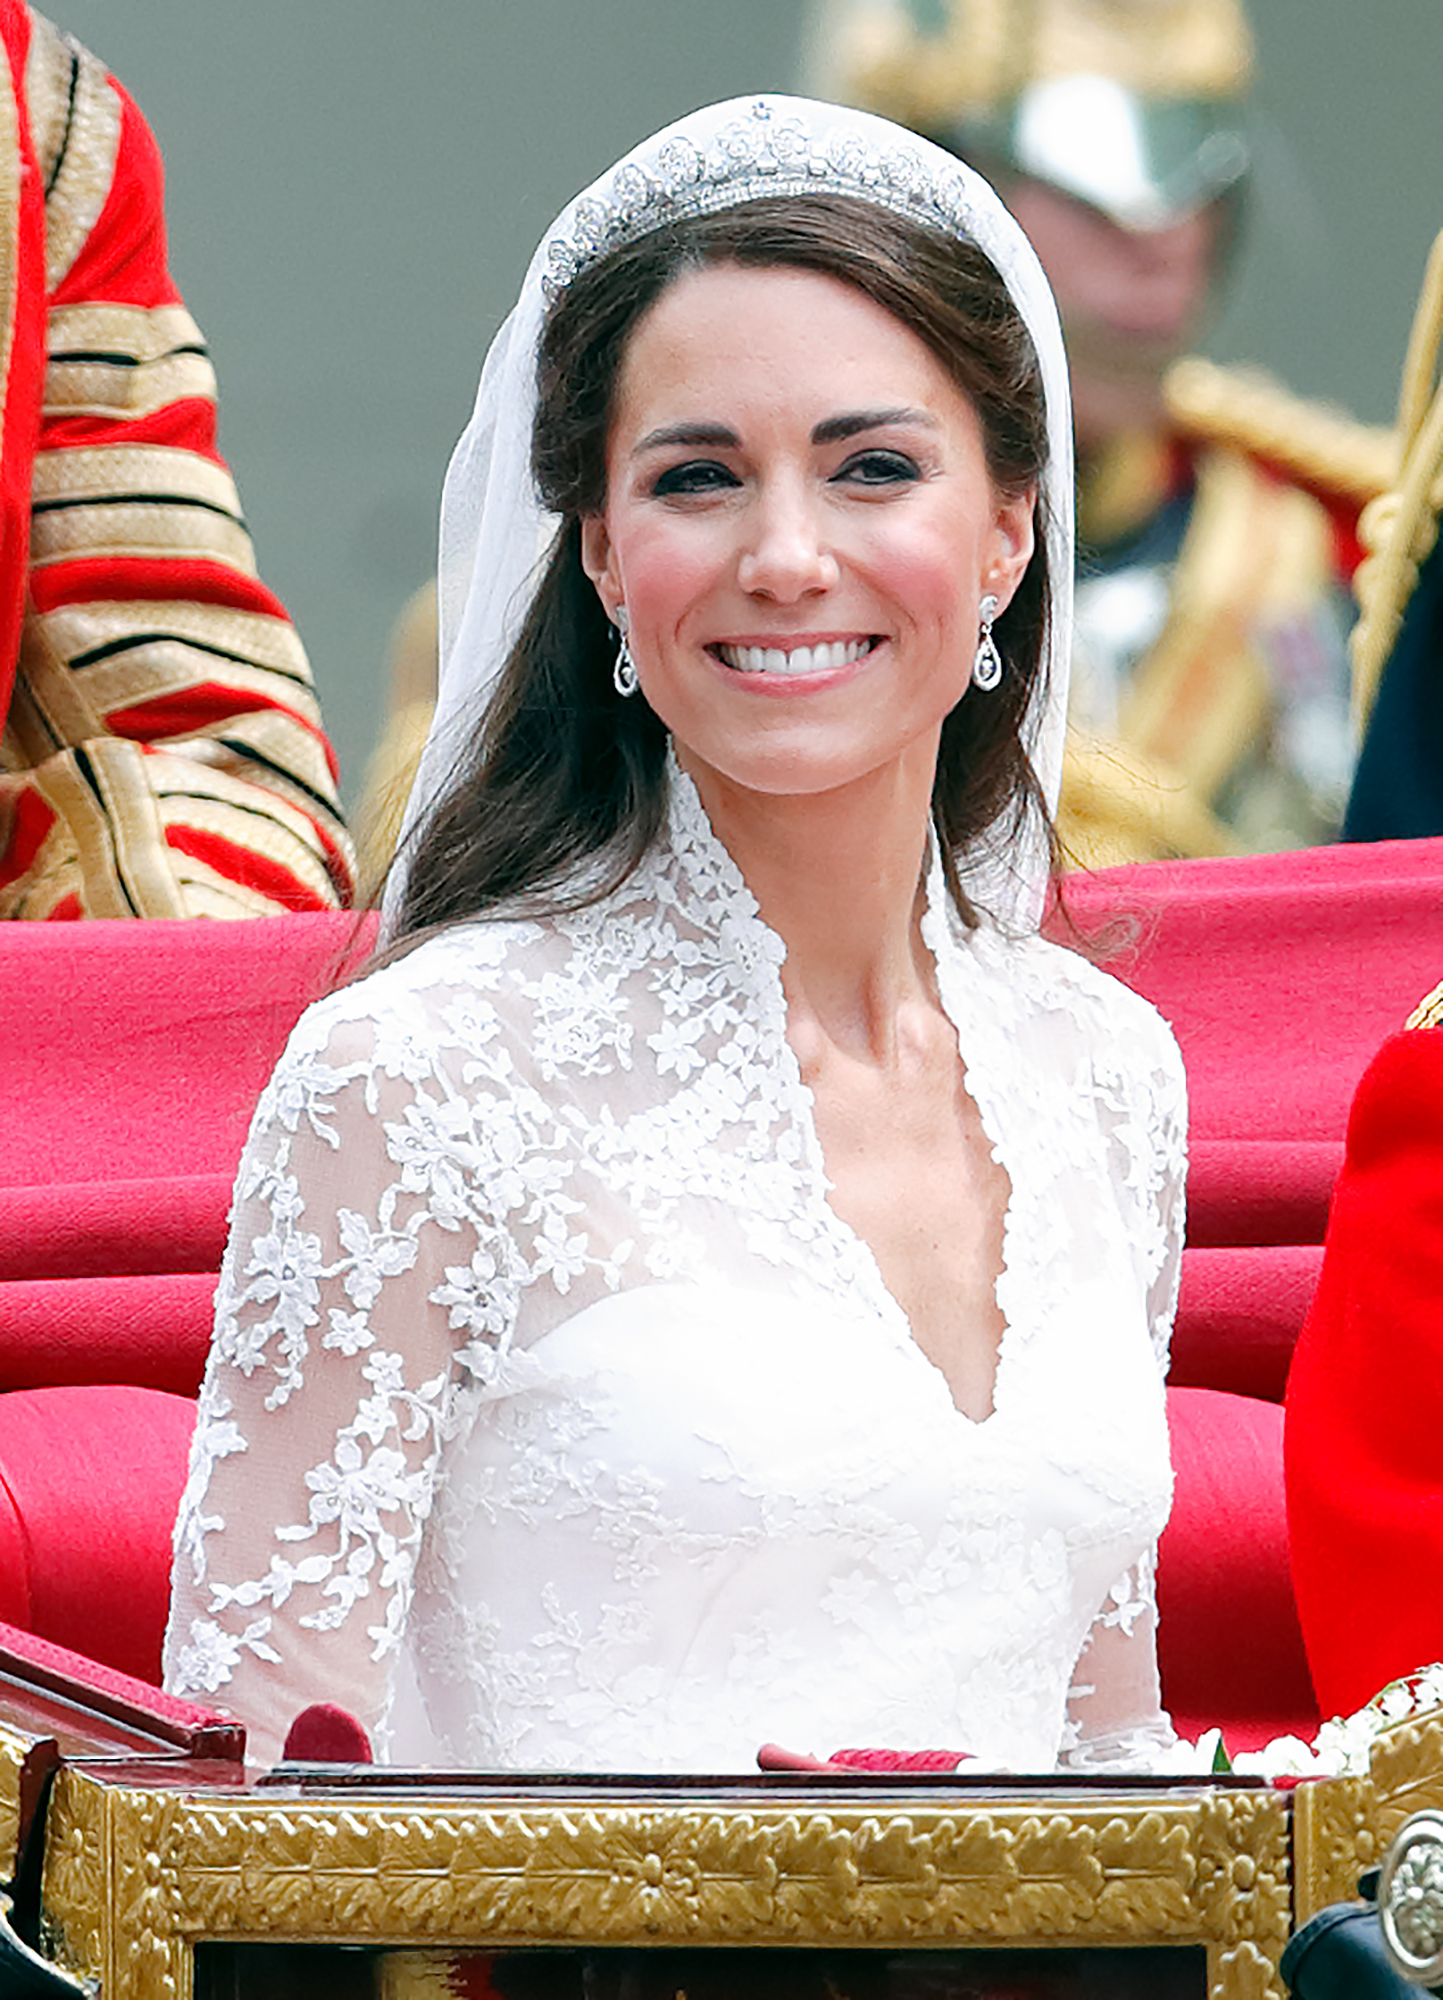 Kate Middleton at Westminster Abbey, London. | Source: Getty Images